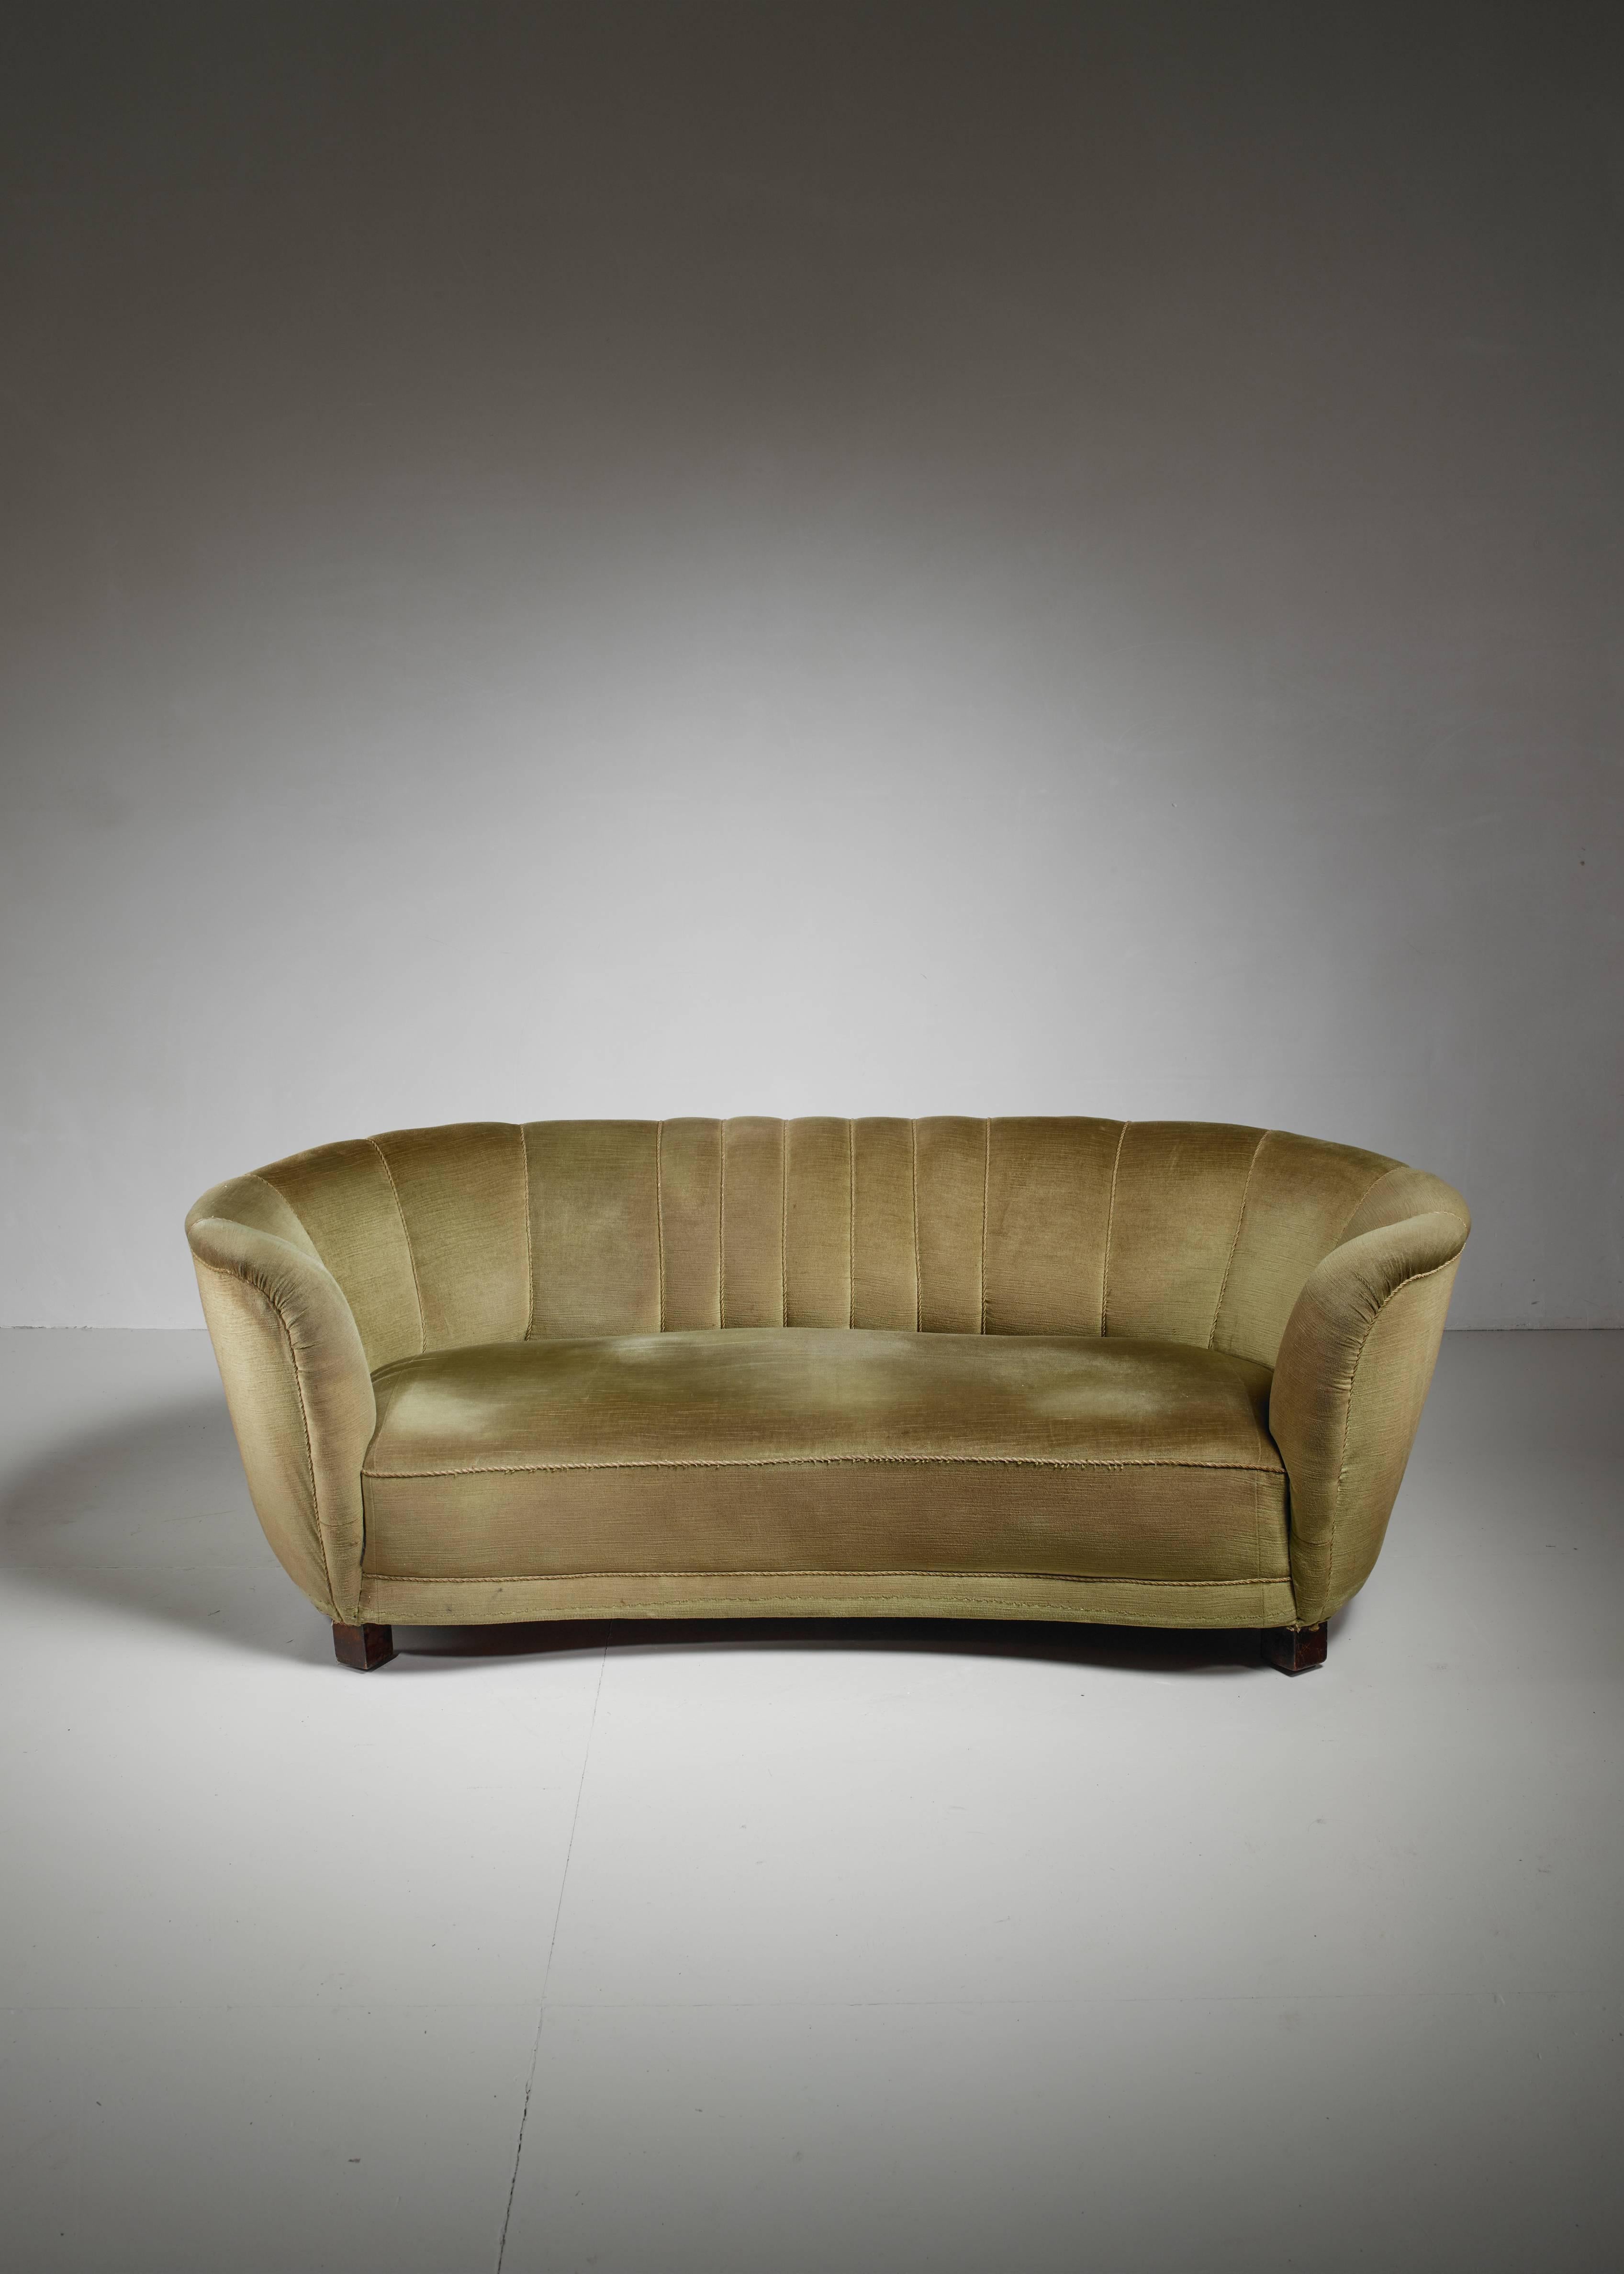 Danish Three-Seat Sofa with Green Velour Upholstery, Denmark, 1940s For Sale